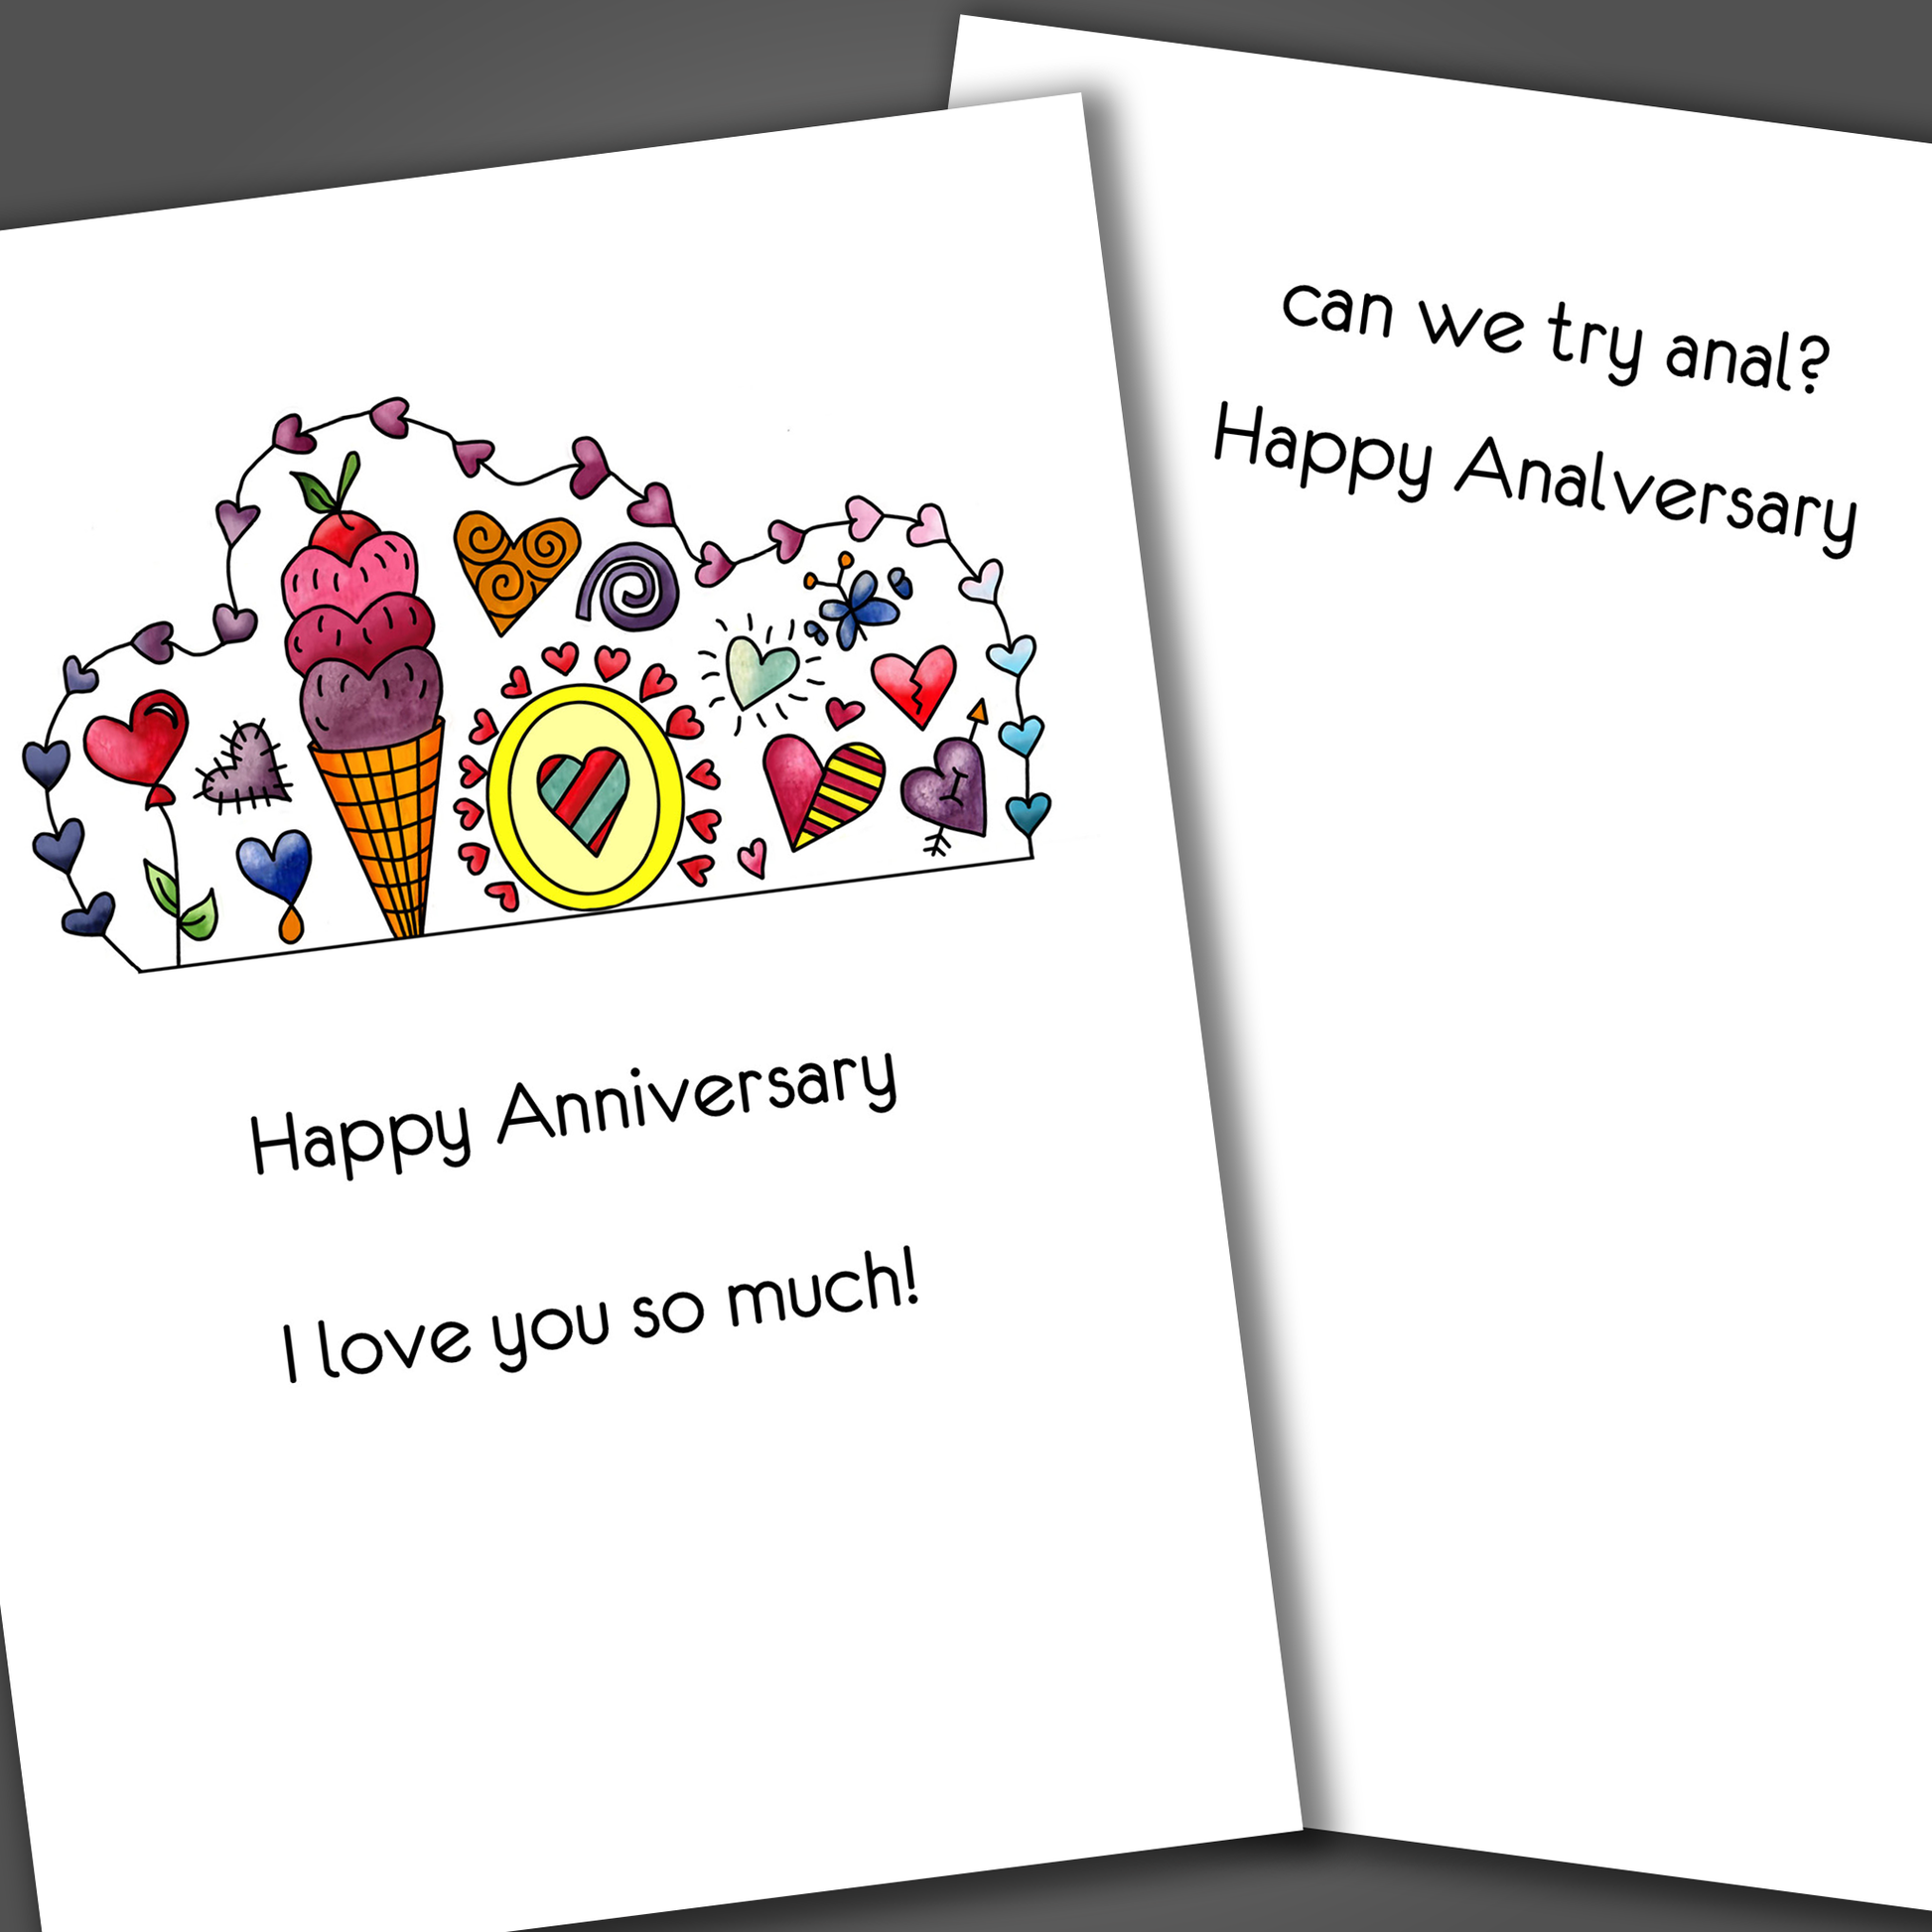 Funny anniversary card with ice cream and hearts on front of card. Inside is a funny joke that says can we try anal this year?